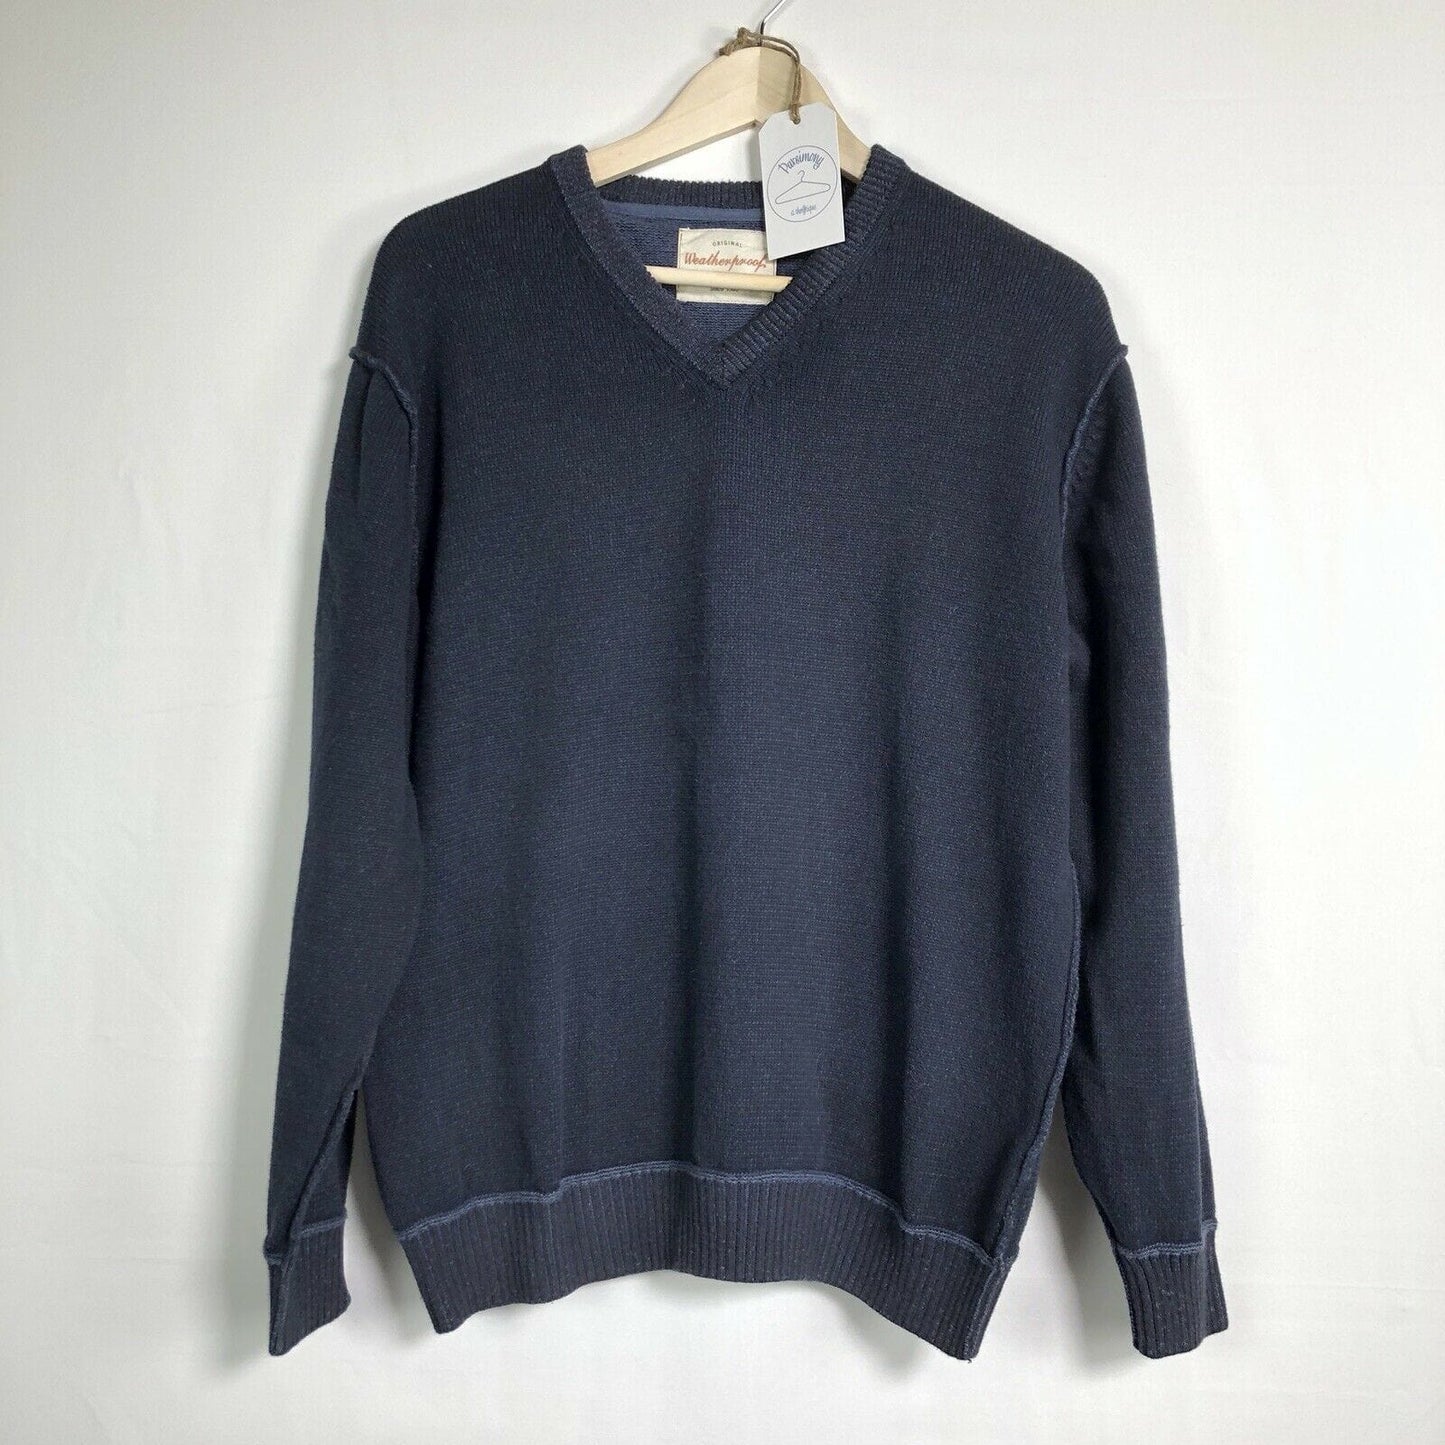 Stay warm and stylish with this Vintage Weatherproof Men's V-Neck Pullover Sweater - Blue, Size L. Very Good Condition.